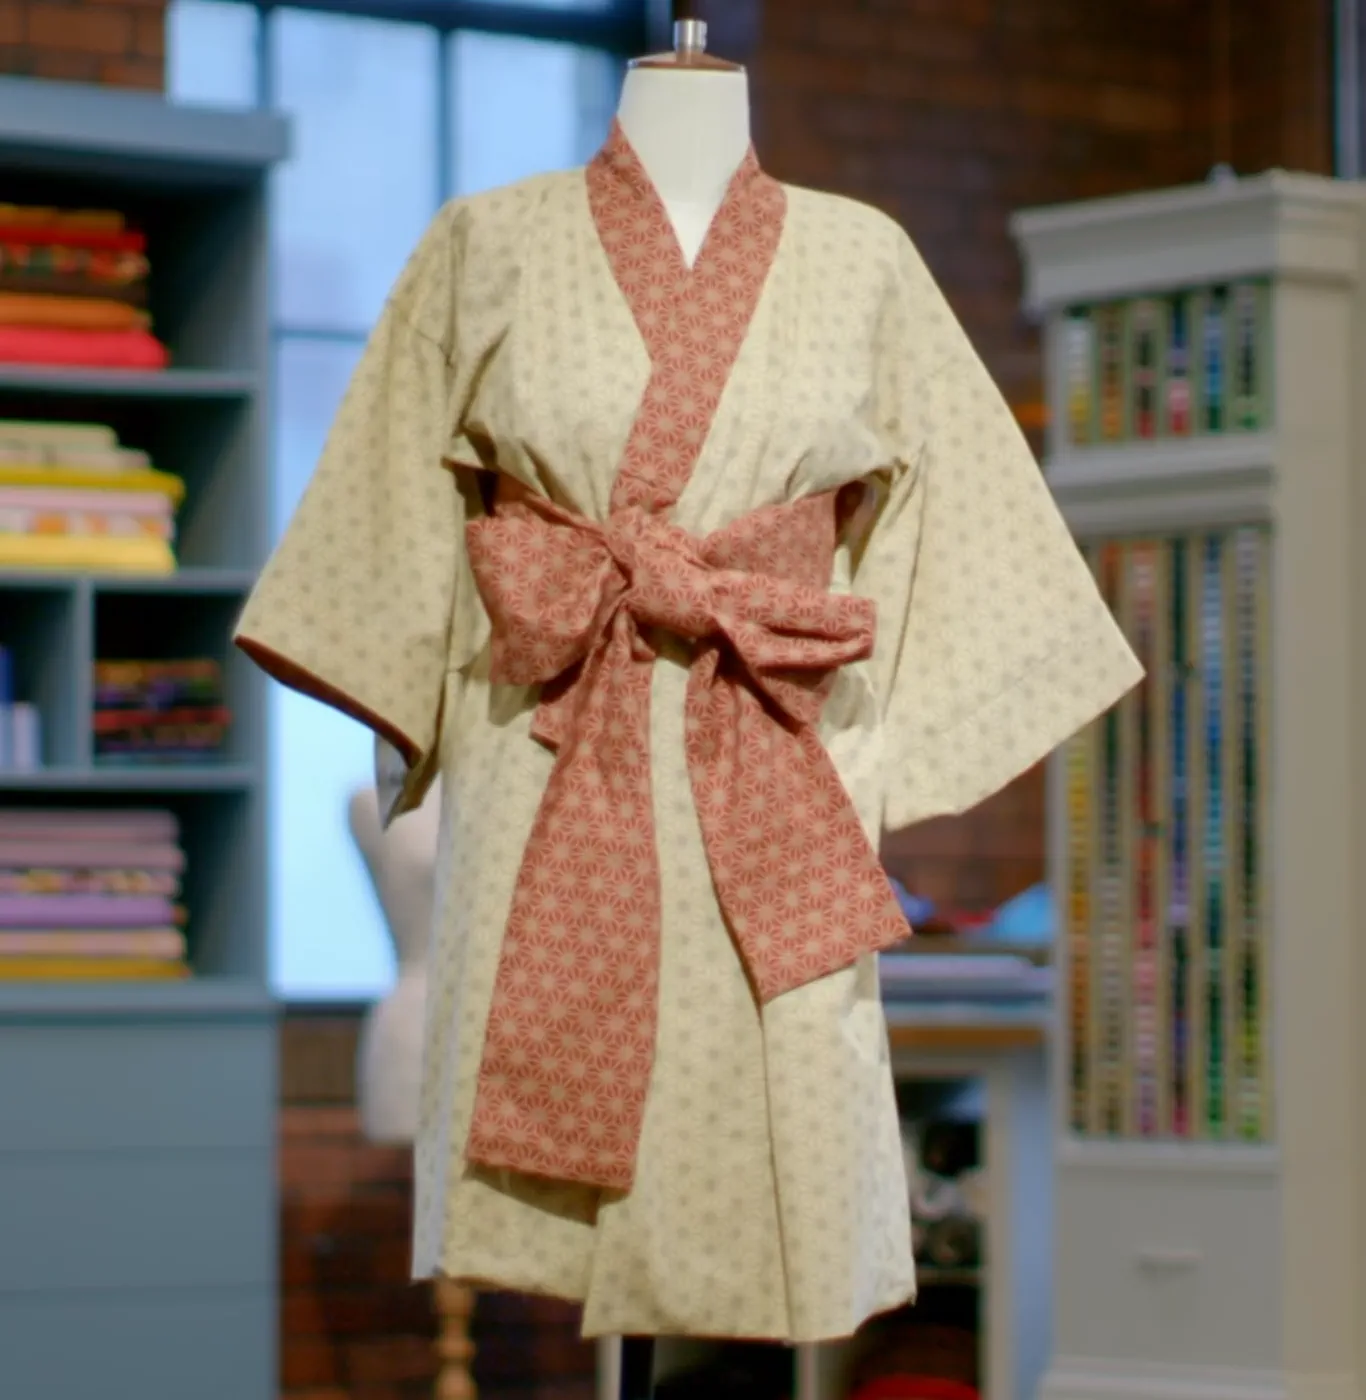 Kimono on a stand with a contrast collar and belt tied in a bow